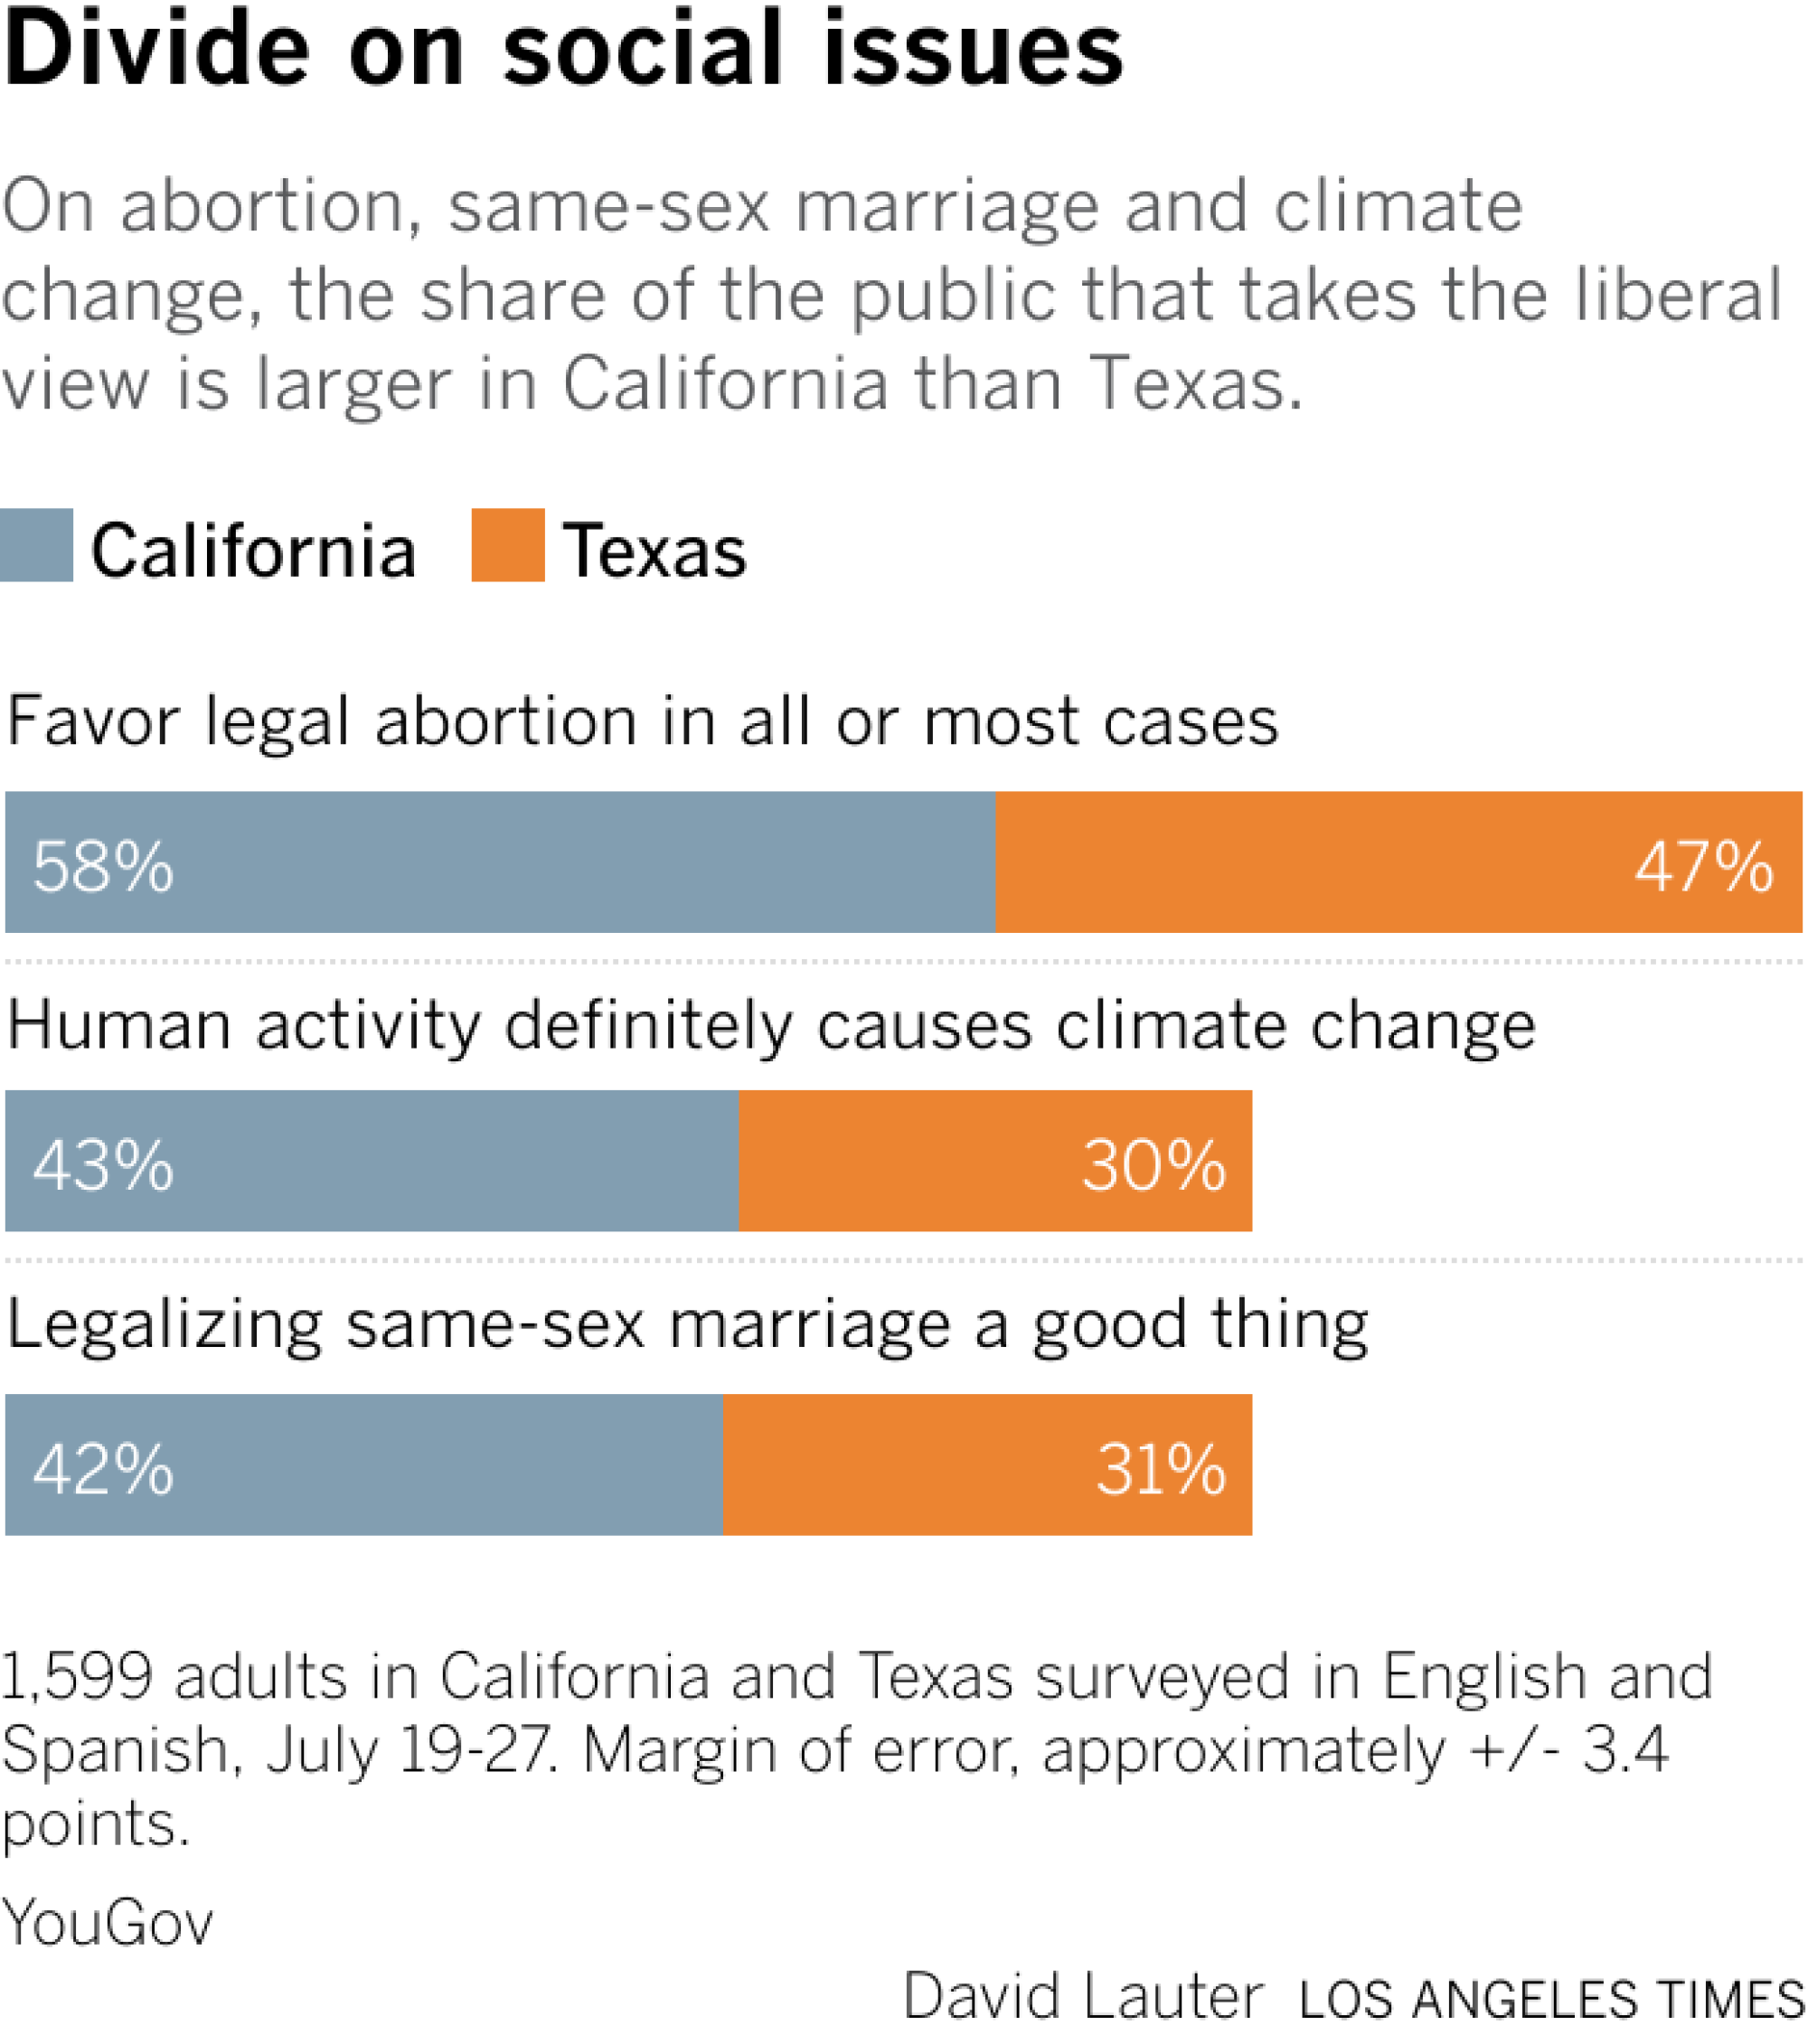 On abortion, same-sex marriage and climate change, the share of the public that takes the liberal view is larger in California than Texas.